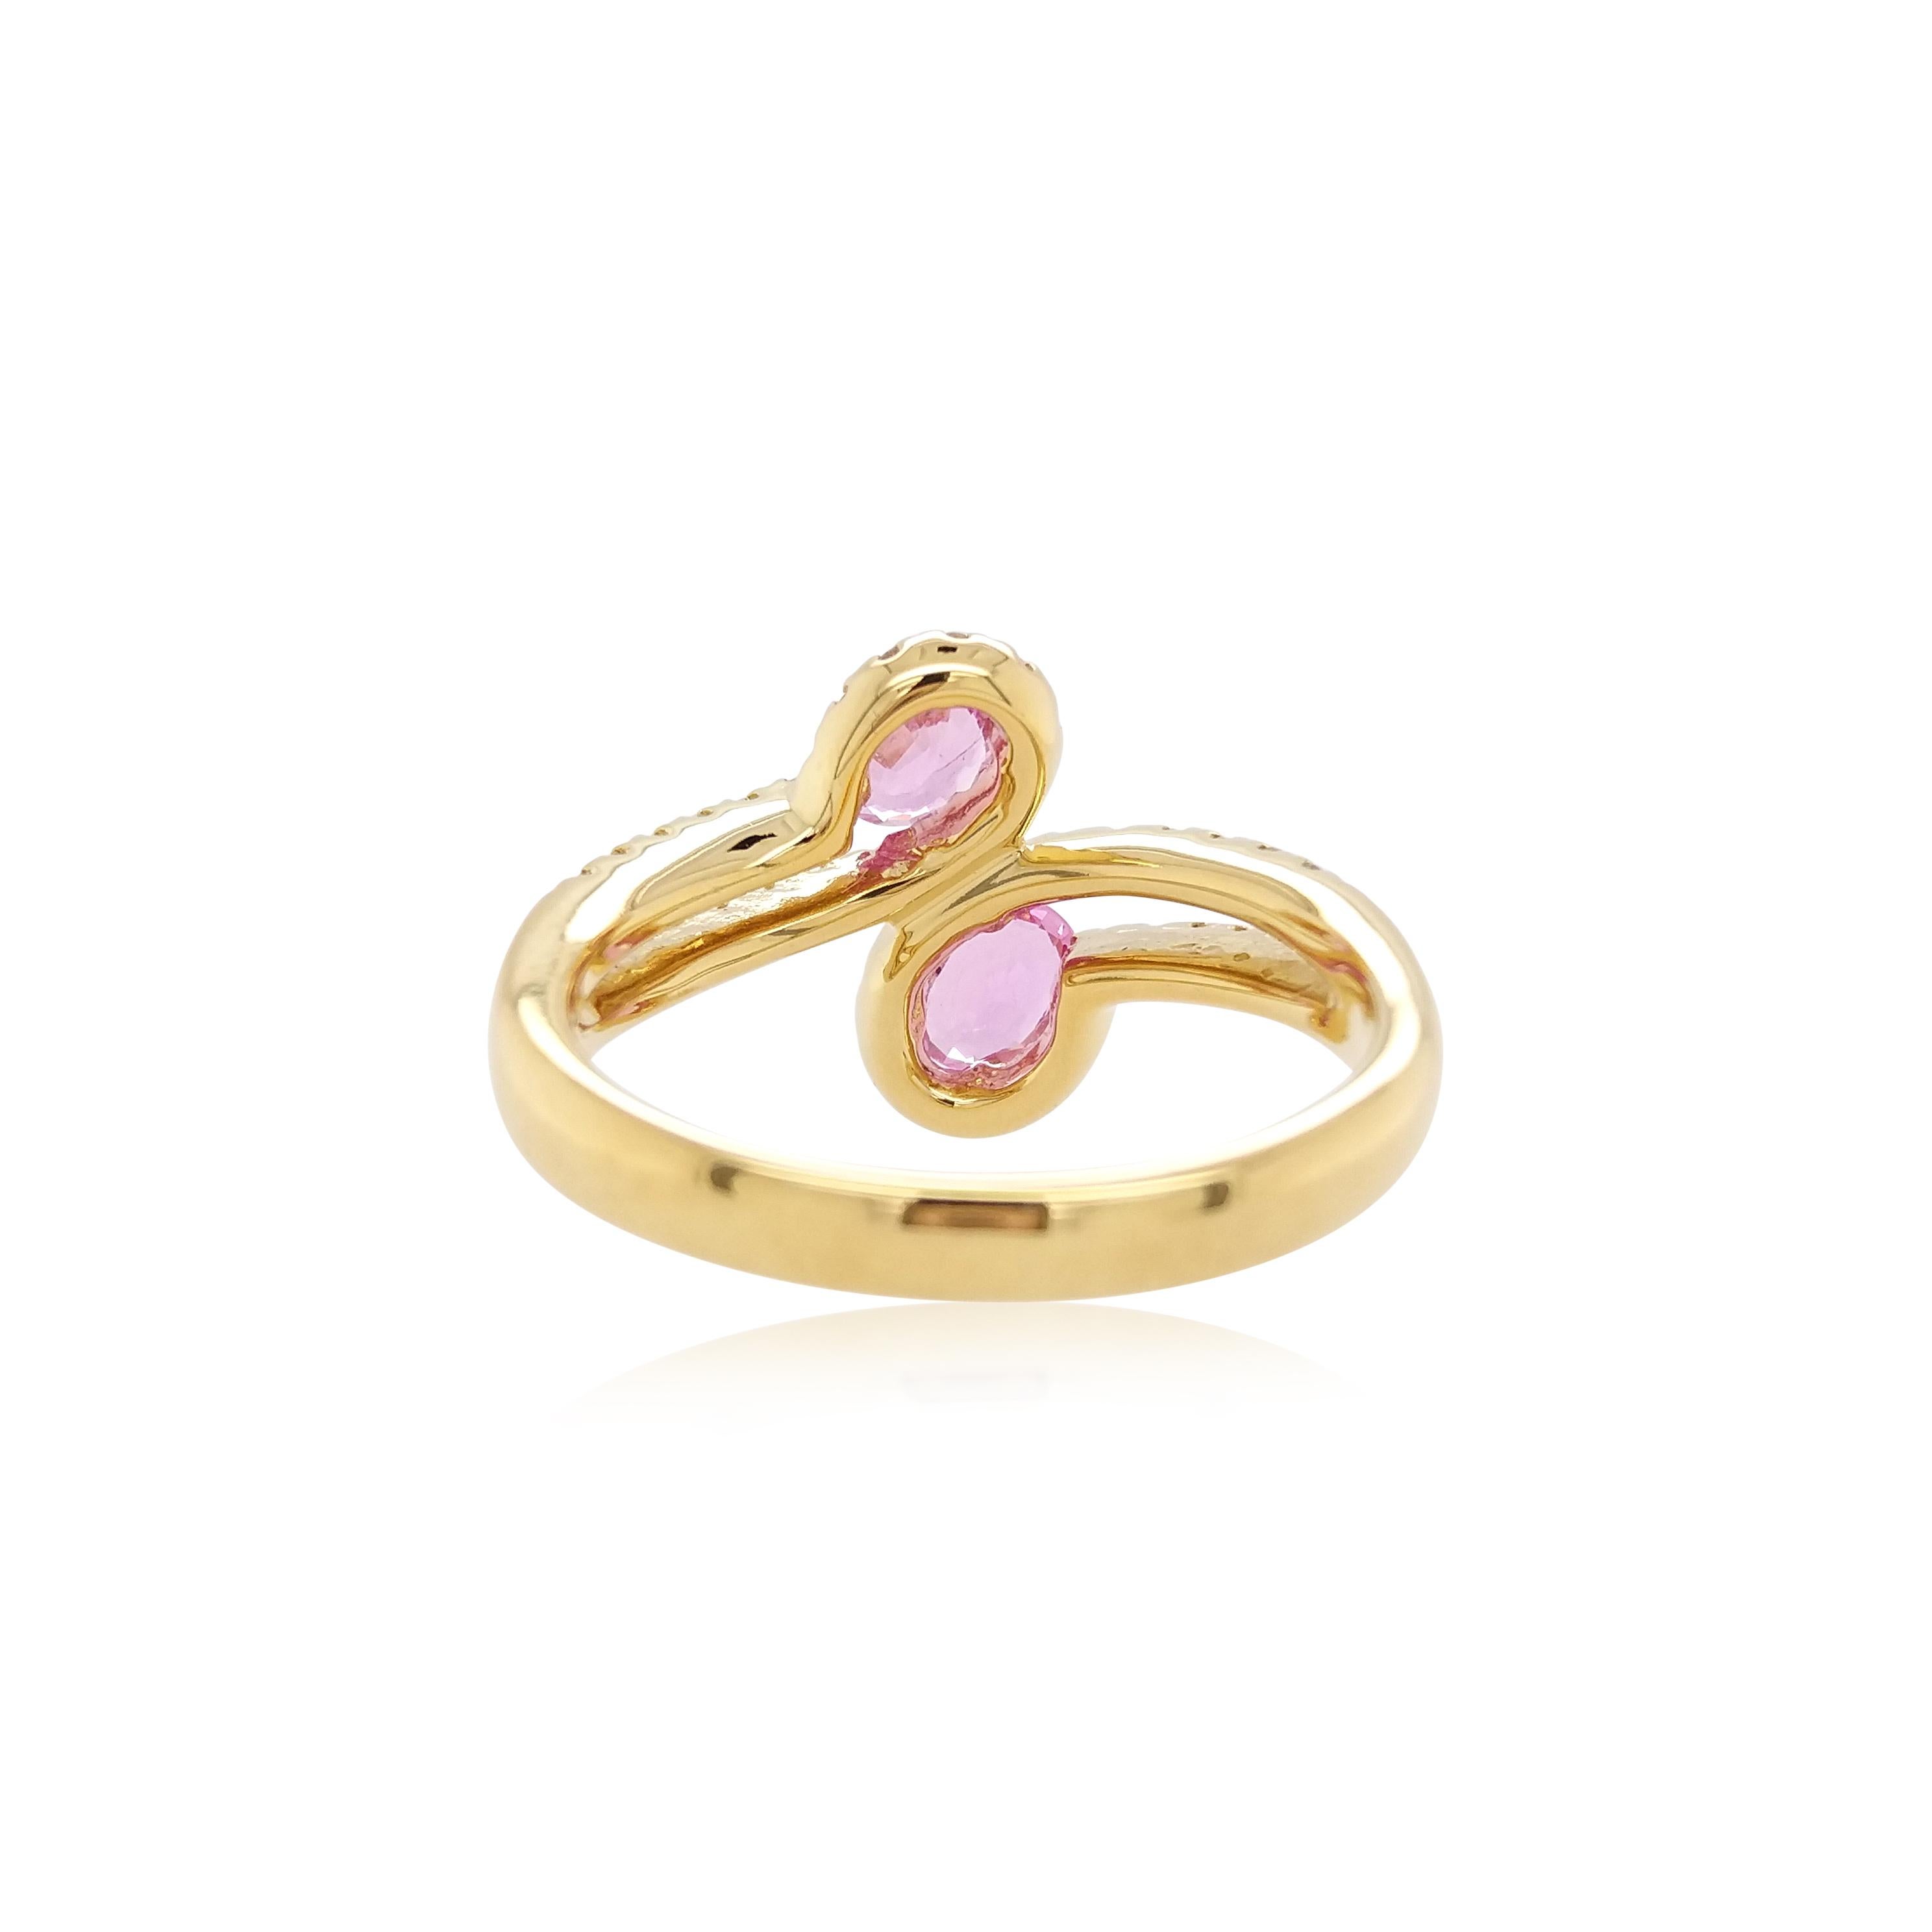 Beauty in the simplistic, this toi et moi ring is formed with two beautiful pink sapphires and elegant arrangement of scintillating white diamonds. Set in 18K yellow gold, dazzling and playful, this ring is a contemporary classic and will make the